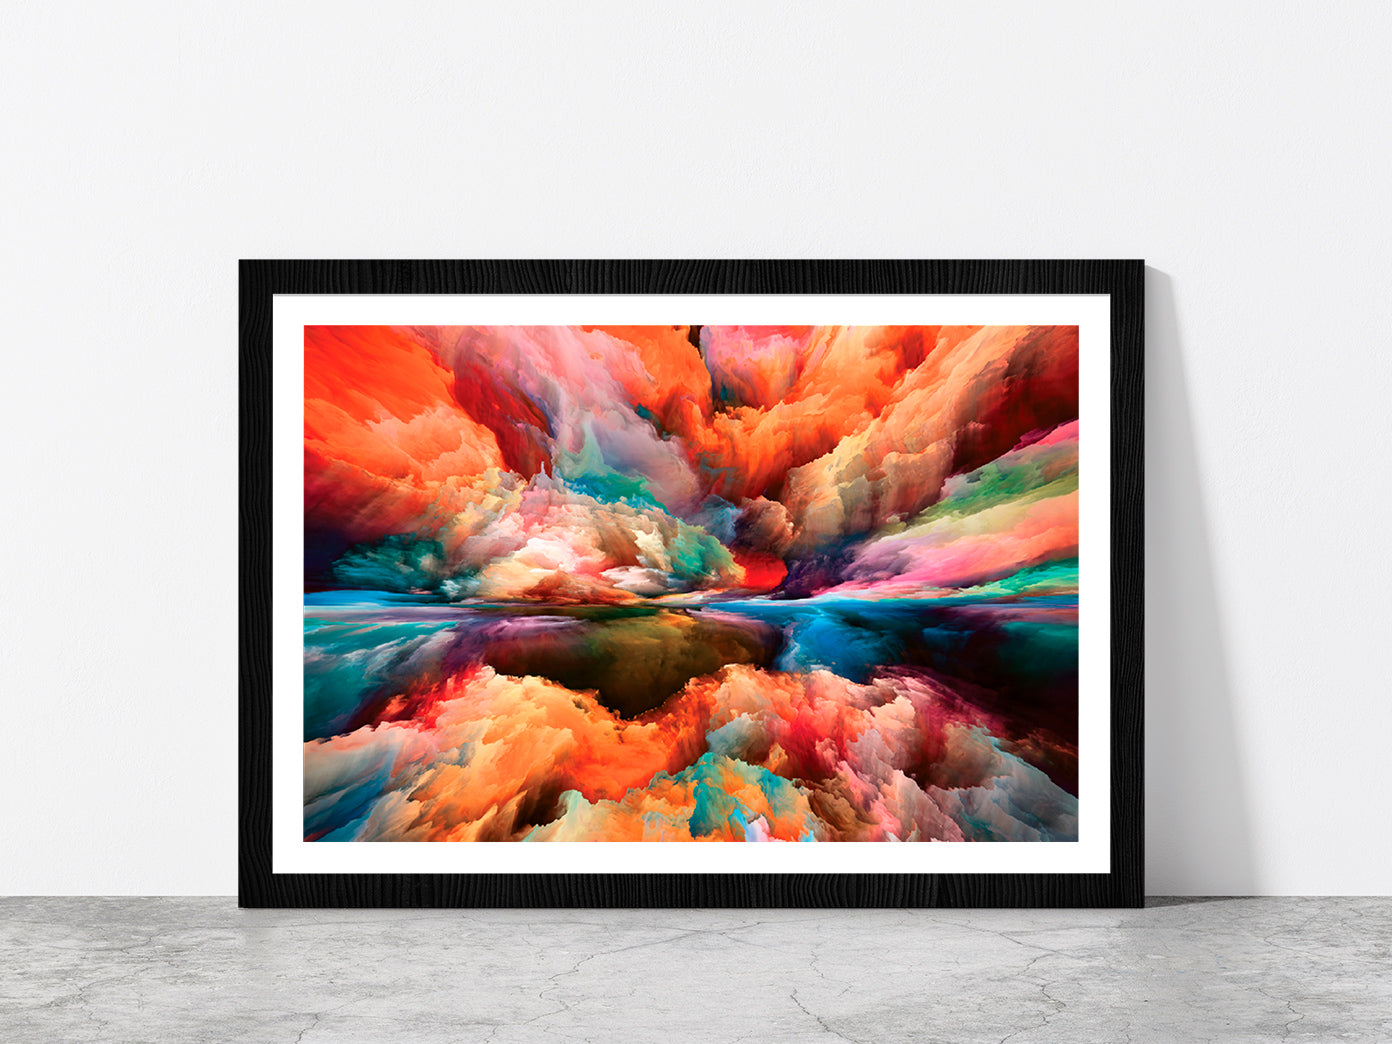 Colorful Abstract Cloud Paint Glass Framed Wall Art, Ready to Hang Quality Print With White Border Black